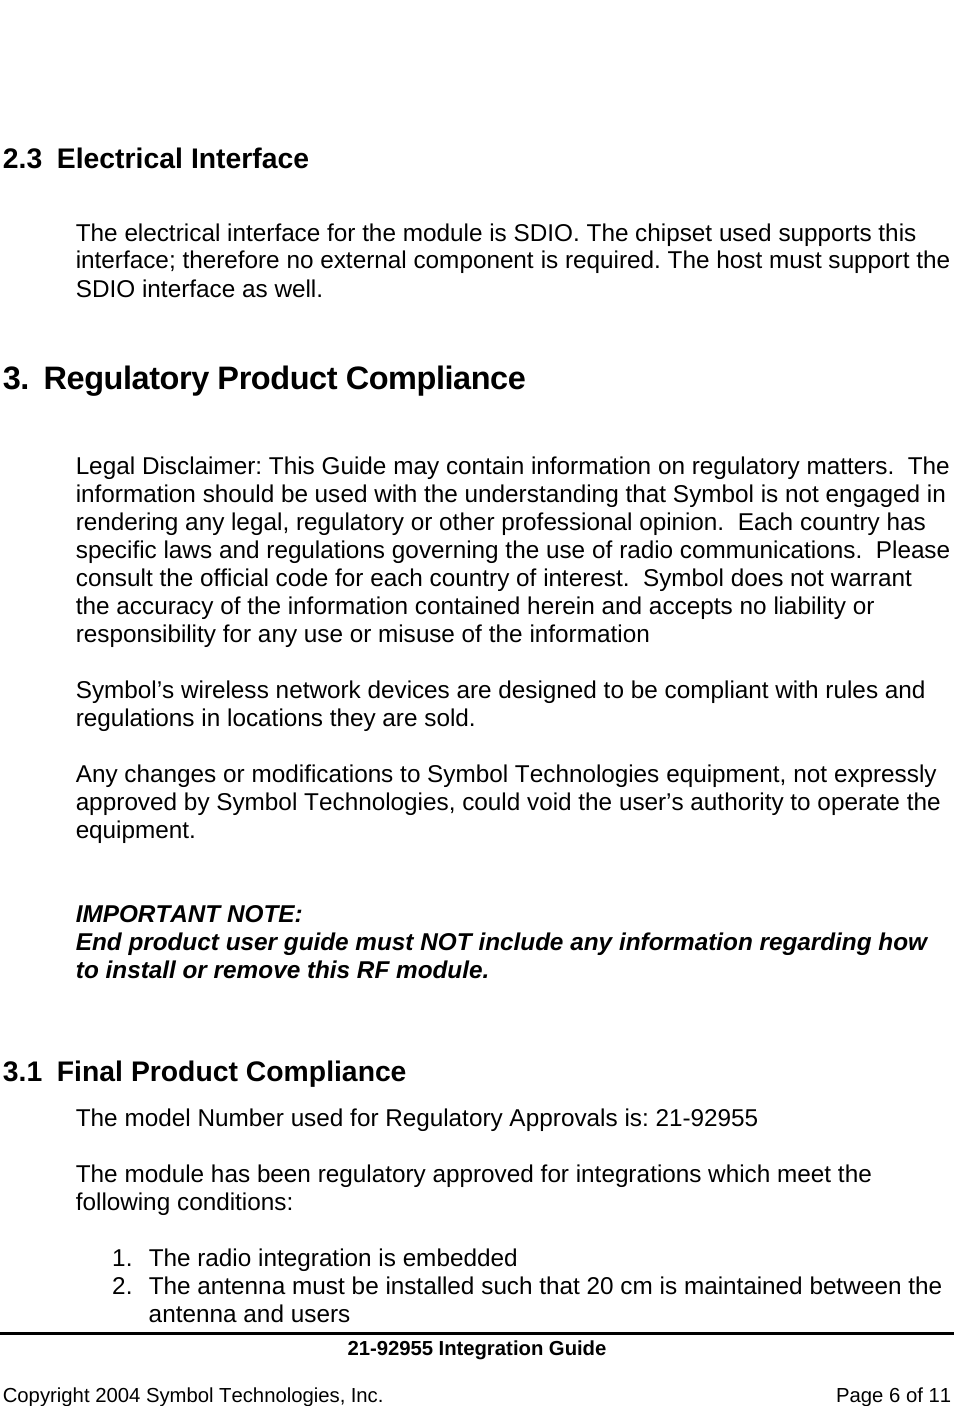     21-92955 Integration Guide  Copyright 2004 Symbol Technologies, Inc.    Page 6 of 11    2.3 Electrical Interface  The electrical interface for the module is SDIO. The chipset used supports this interface; therefore no external component is required. The host must support the SDIO interface as well.   3. Regulatory Product Compliance  Legal Disclaimer: This Guide may contain information on regulatory matters.  The information should be used with the understanding that Symbol is not engaged in rendering any legal, regulatory or other professional opinion.  Each country has specific laws and regulations governing the use of radio communications.  Please consult the official code for each country of interest.  Symbol does not warrant the accuracy of the information contained herein and accepts no liability or responsibility for any use or misuse of the information  Symbol’s wireless network devices are designed to be compliant with rules and regulations in locations they are sold.   Any changes or modifications to Symbol Technologies equipment, not expressly approved by Symbol Technologies, could void the user’s authority to operate the equipment.   IMPORTANT NOTE:  End product user guide must NOT include any information regarding how to install or remove this RF module.   3.1  Final Product Compliance The model Number used for Regulatory Approvals is: 21-92955  The module has been regulatory approved for integrations which meet the following conditions:  1.  The radio integration is embedded 2.  The antenna must be installed such that 20 cm is maintained between the antenna and users 